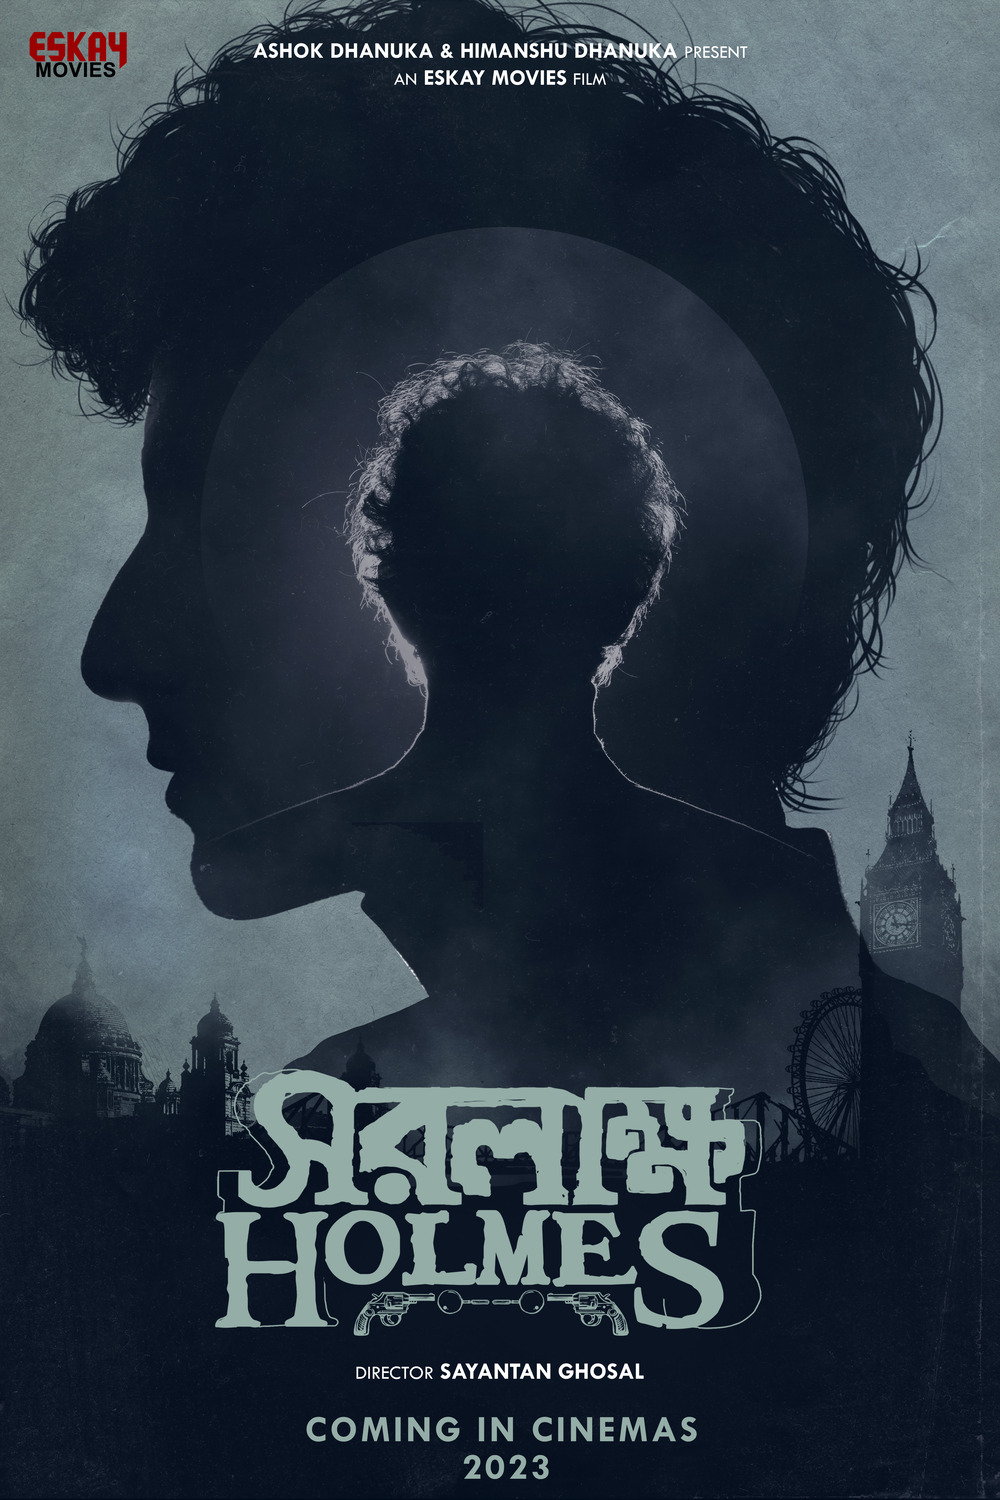 Extra Large Movie Poster Image for Saralakkha Holmes 